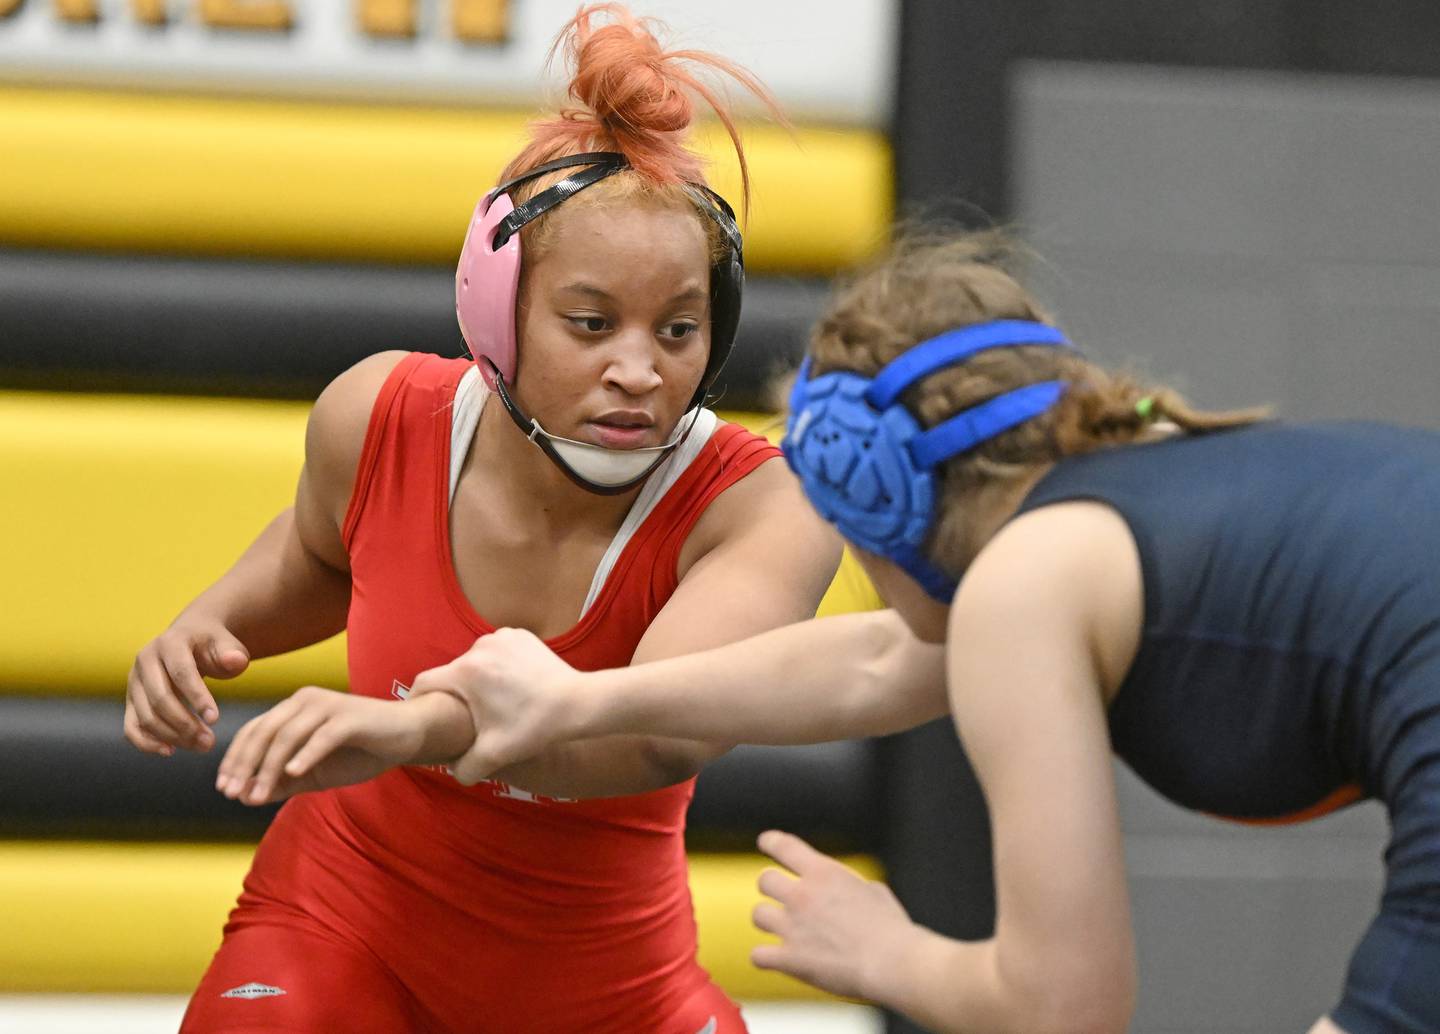 Homewood-Flossmoor’s Attalia Watson-Castro battles in the 135-pound championship match of the Andrew Sectional in Tinley Park on Saturday, Feb. 12, 2022.